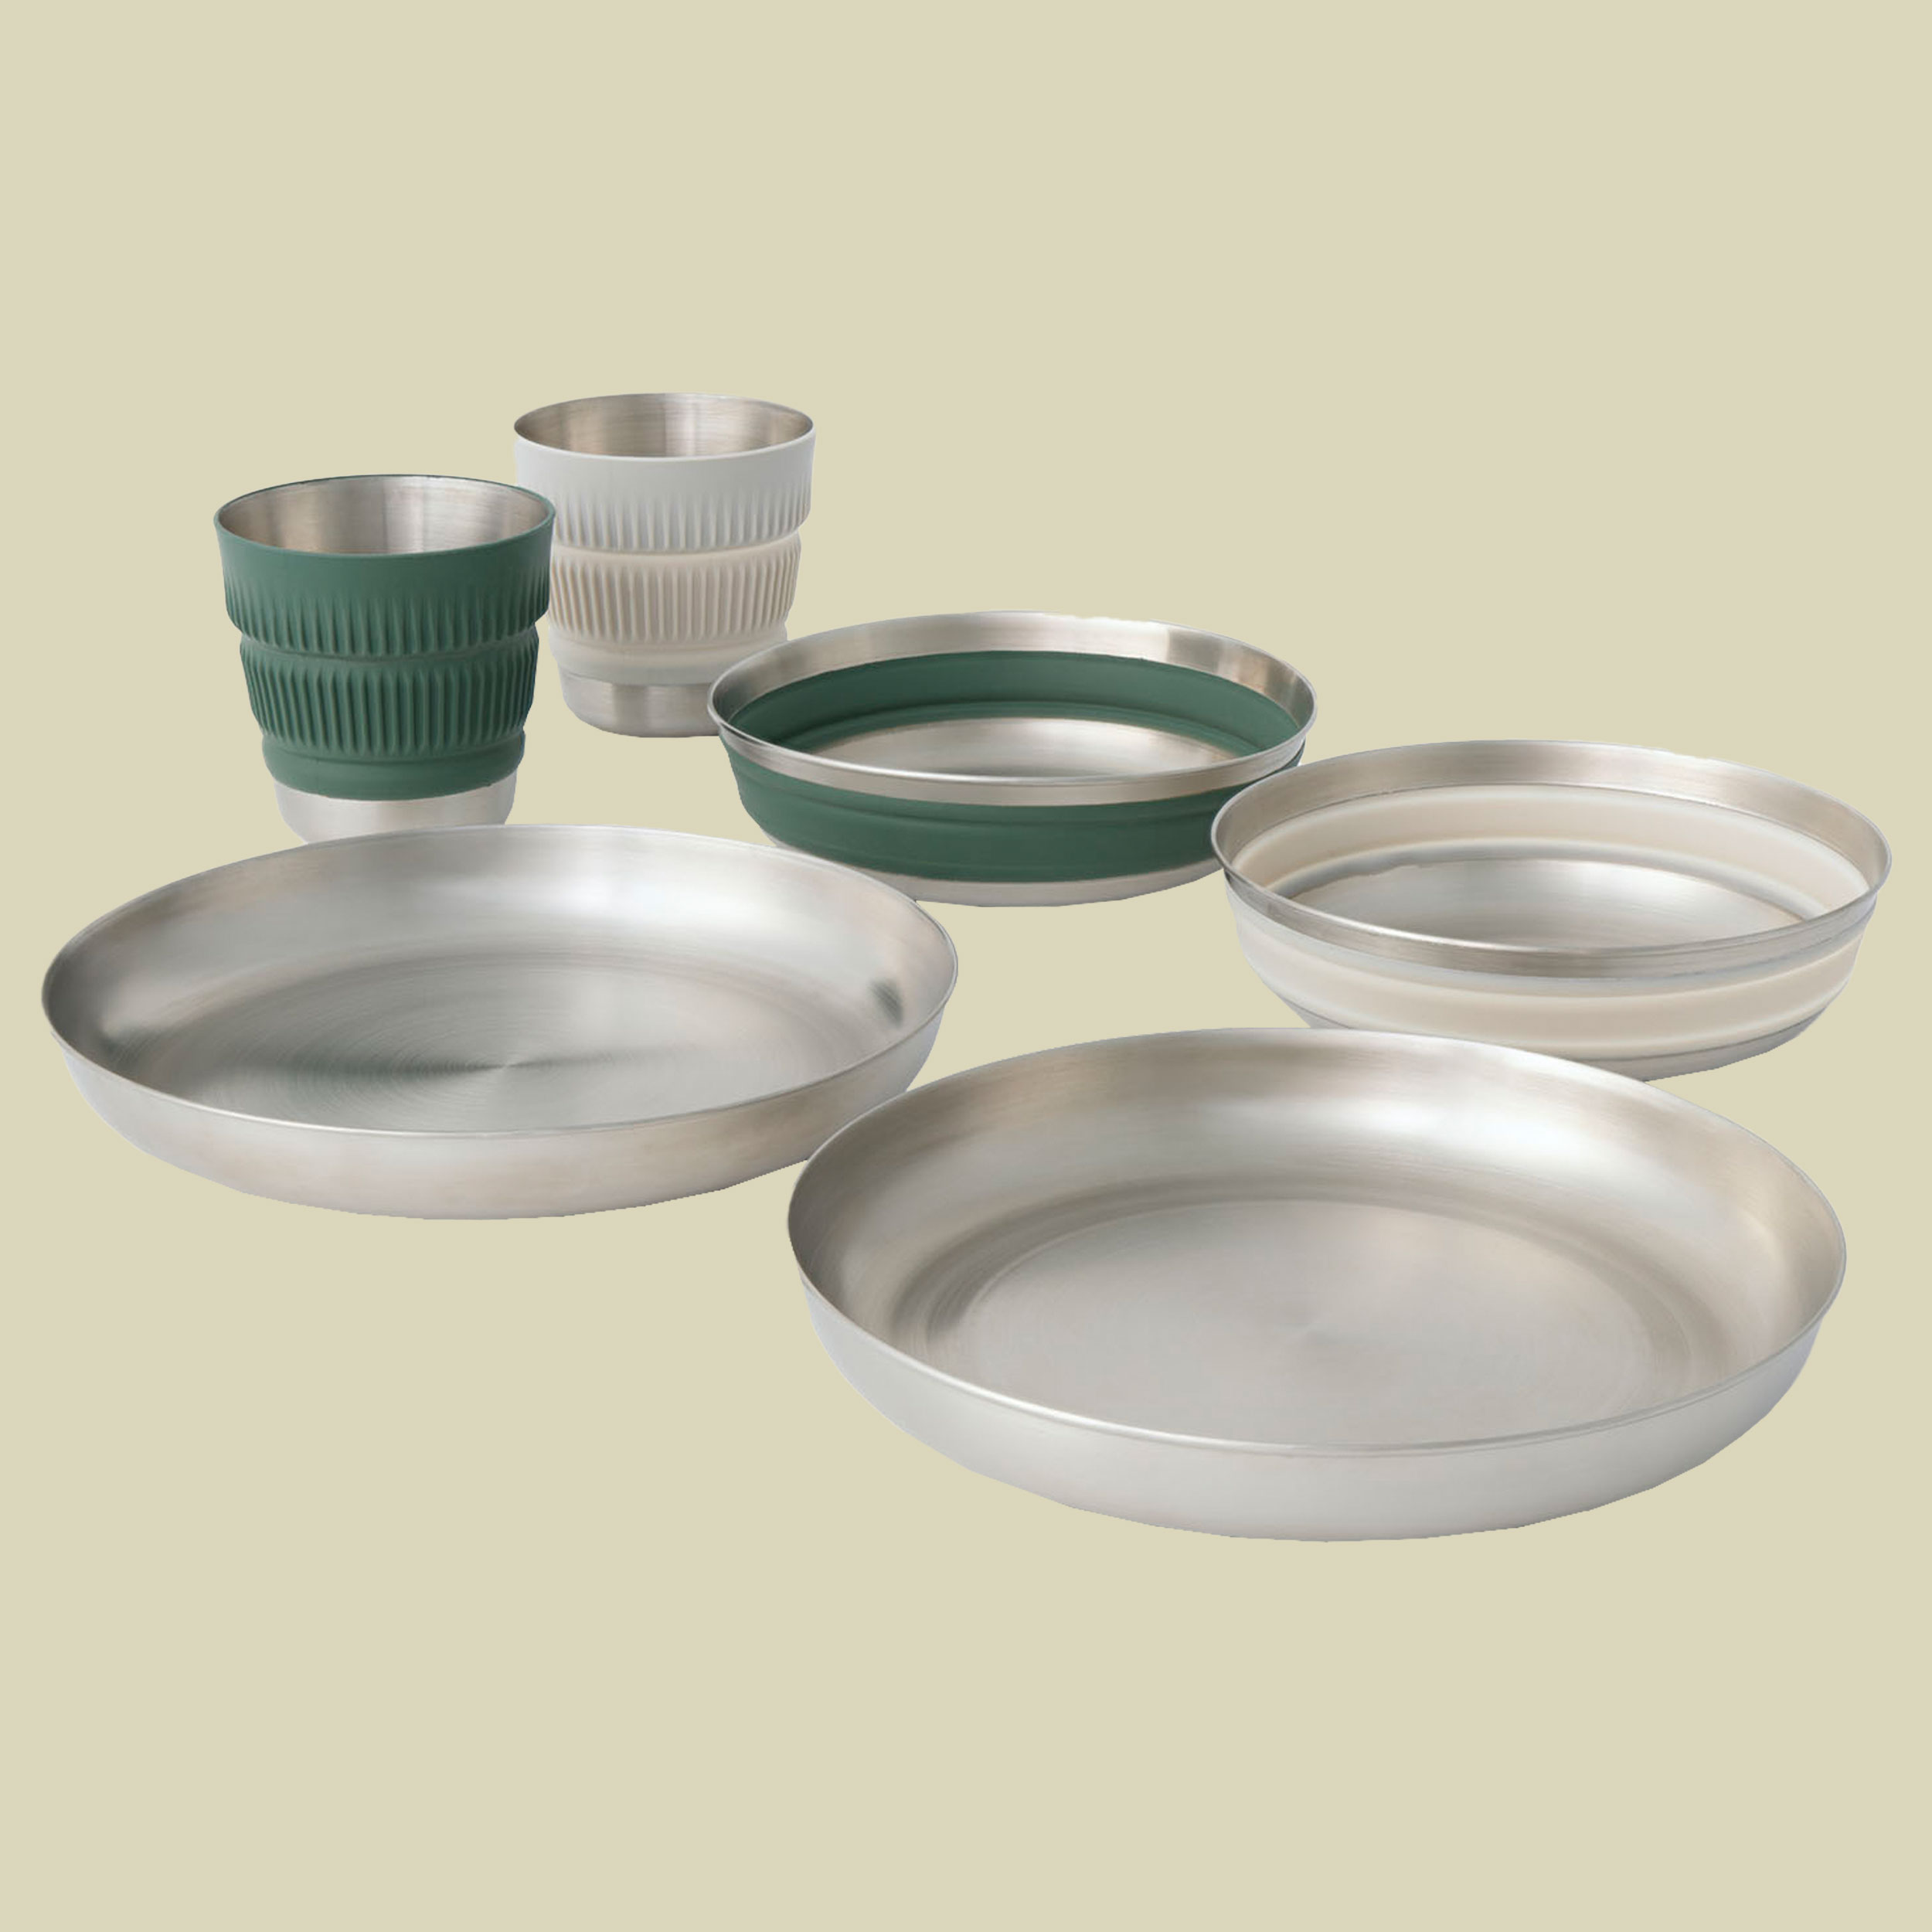 Detour Stainless Steel Collapsible Dinnerware Set